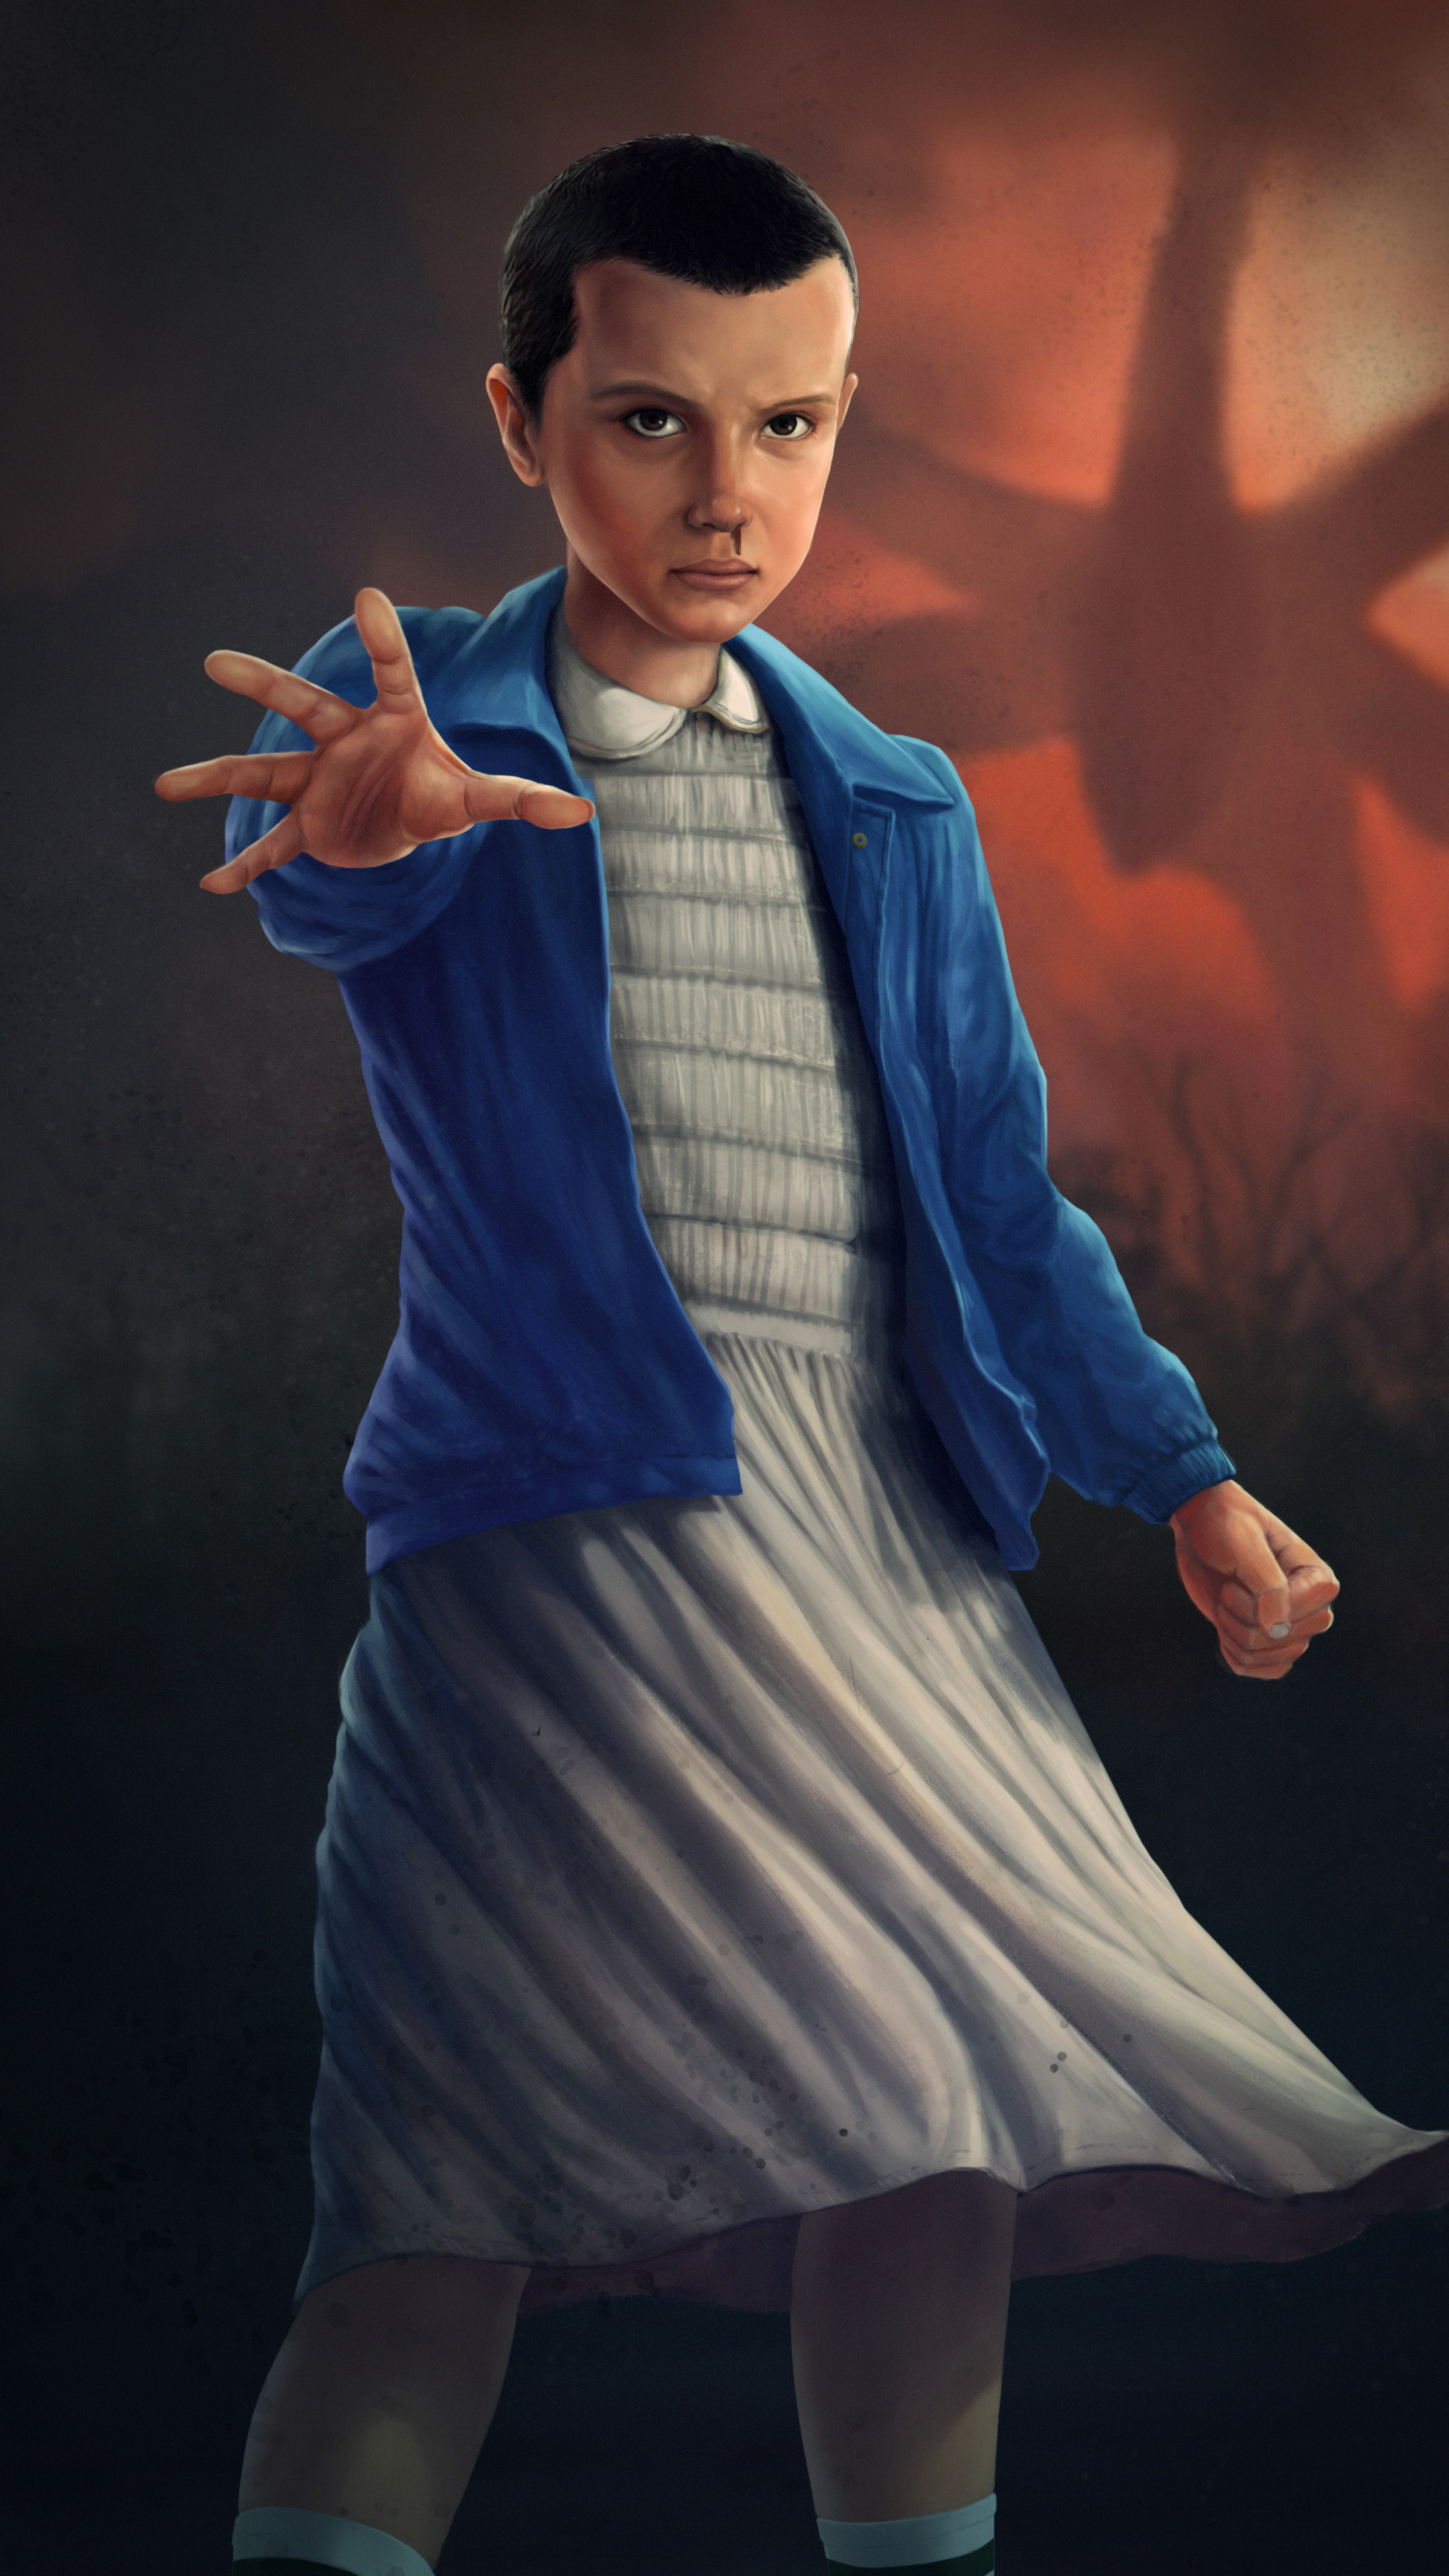 Stranger Things character, Eleven, Sony Xperia wallpapers, Digital art, 2160x3840 4K Phone